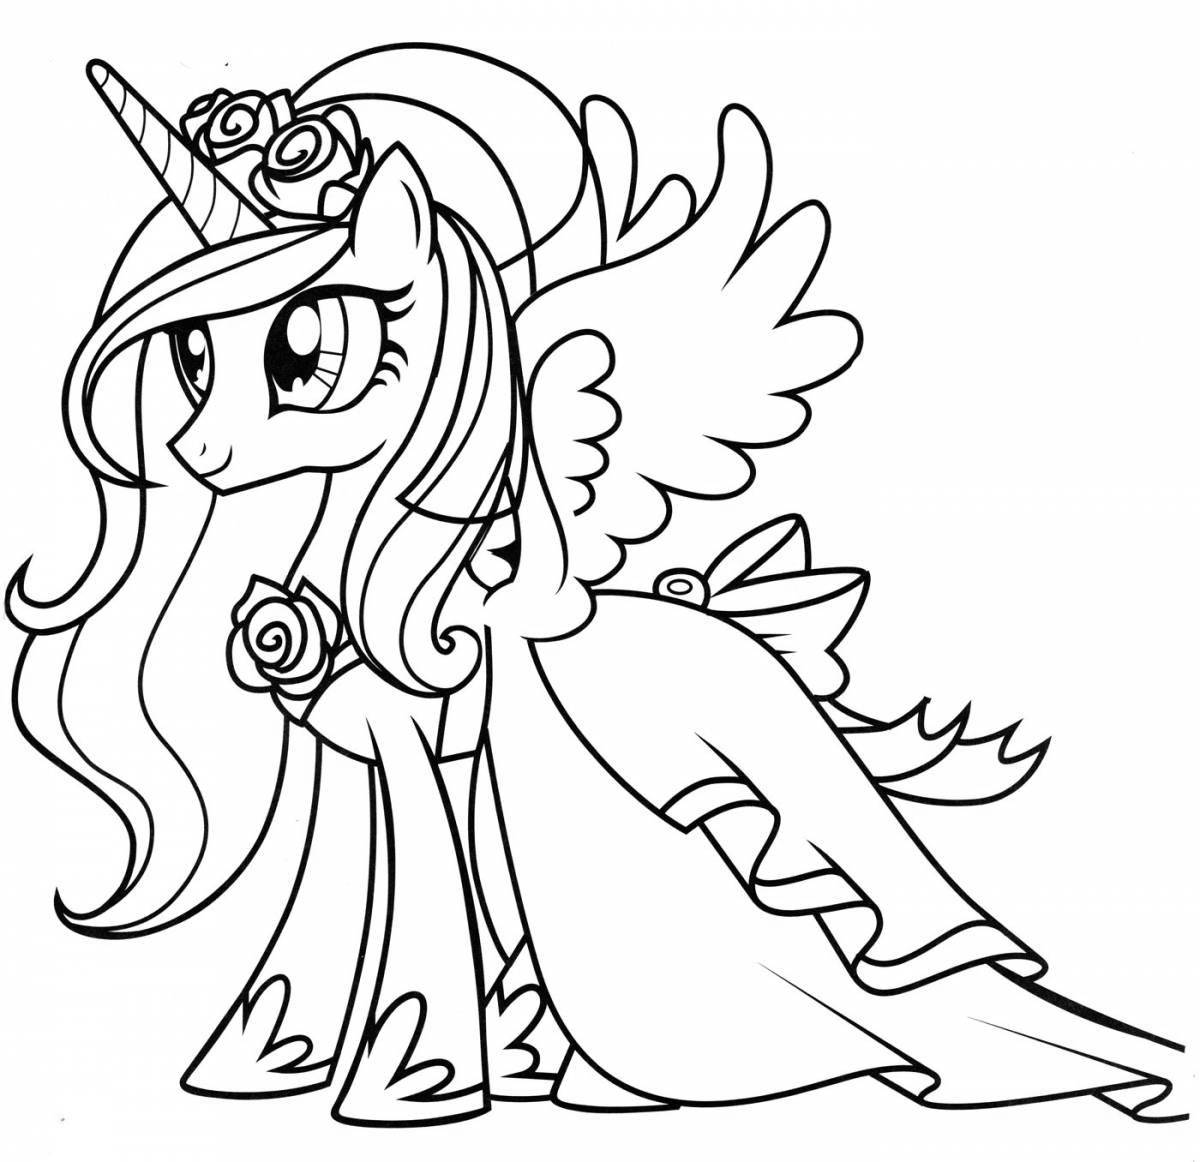 Playful coloring of a pony in a dress